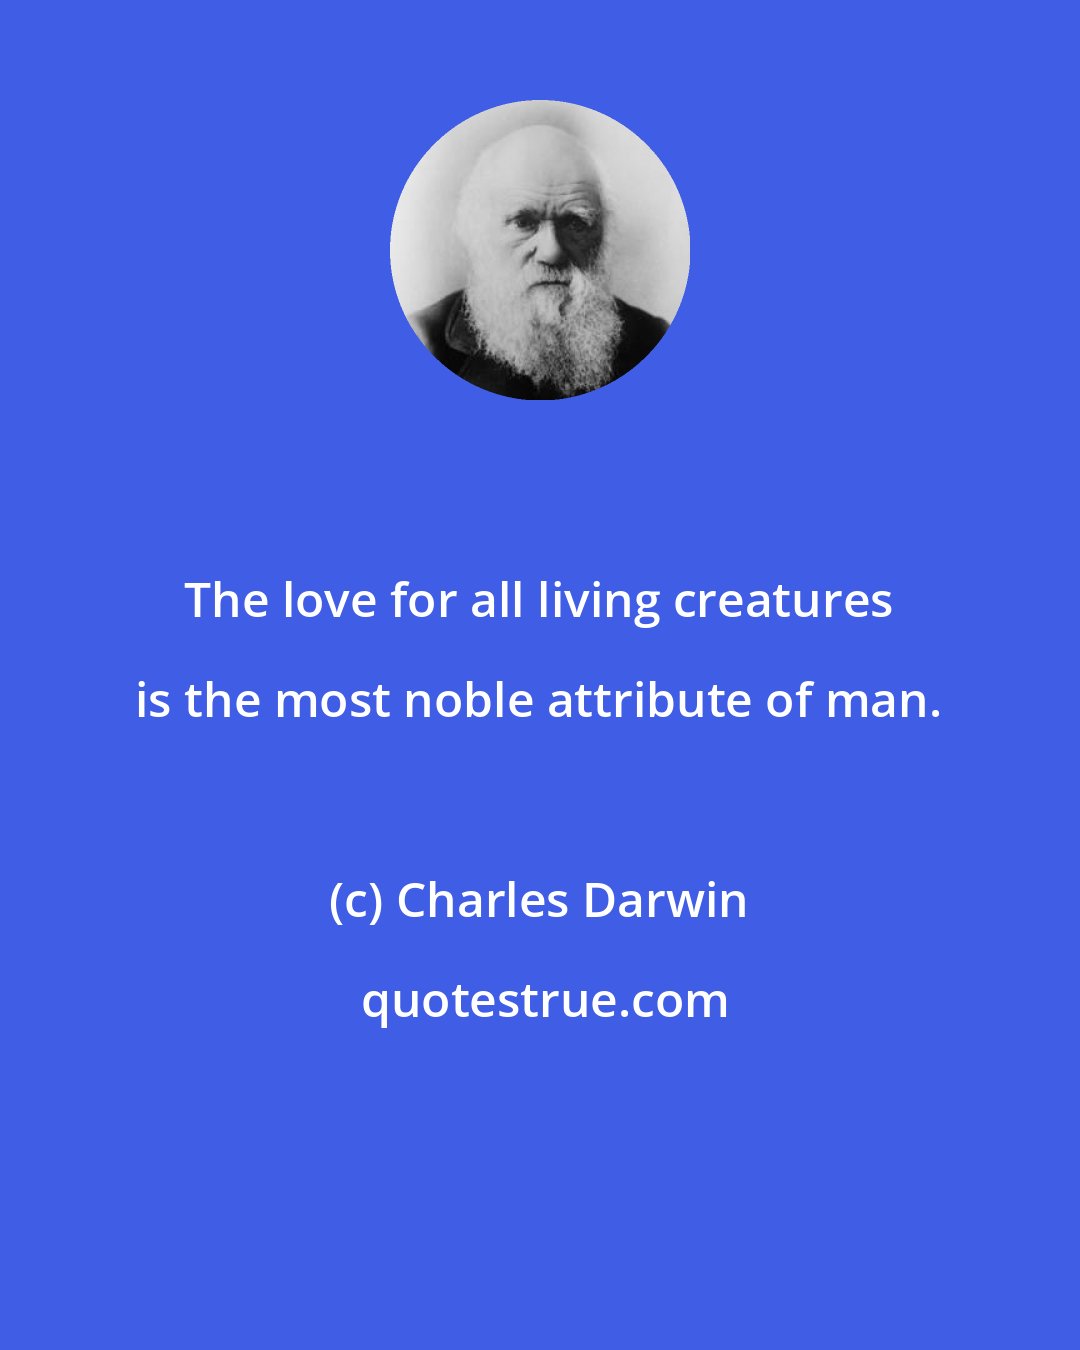 Charles Darwin: The love for all living creatures is the most noble attribute of man.